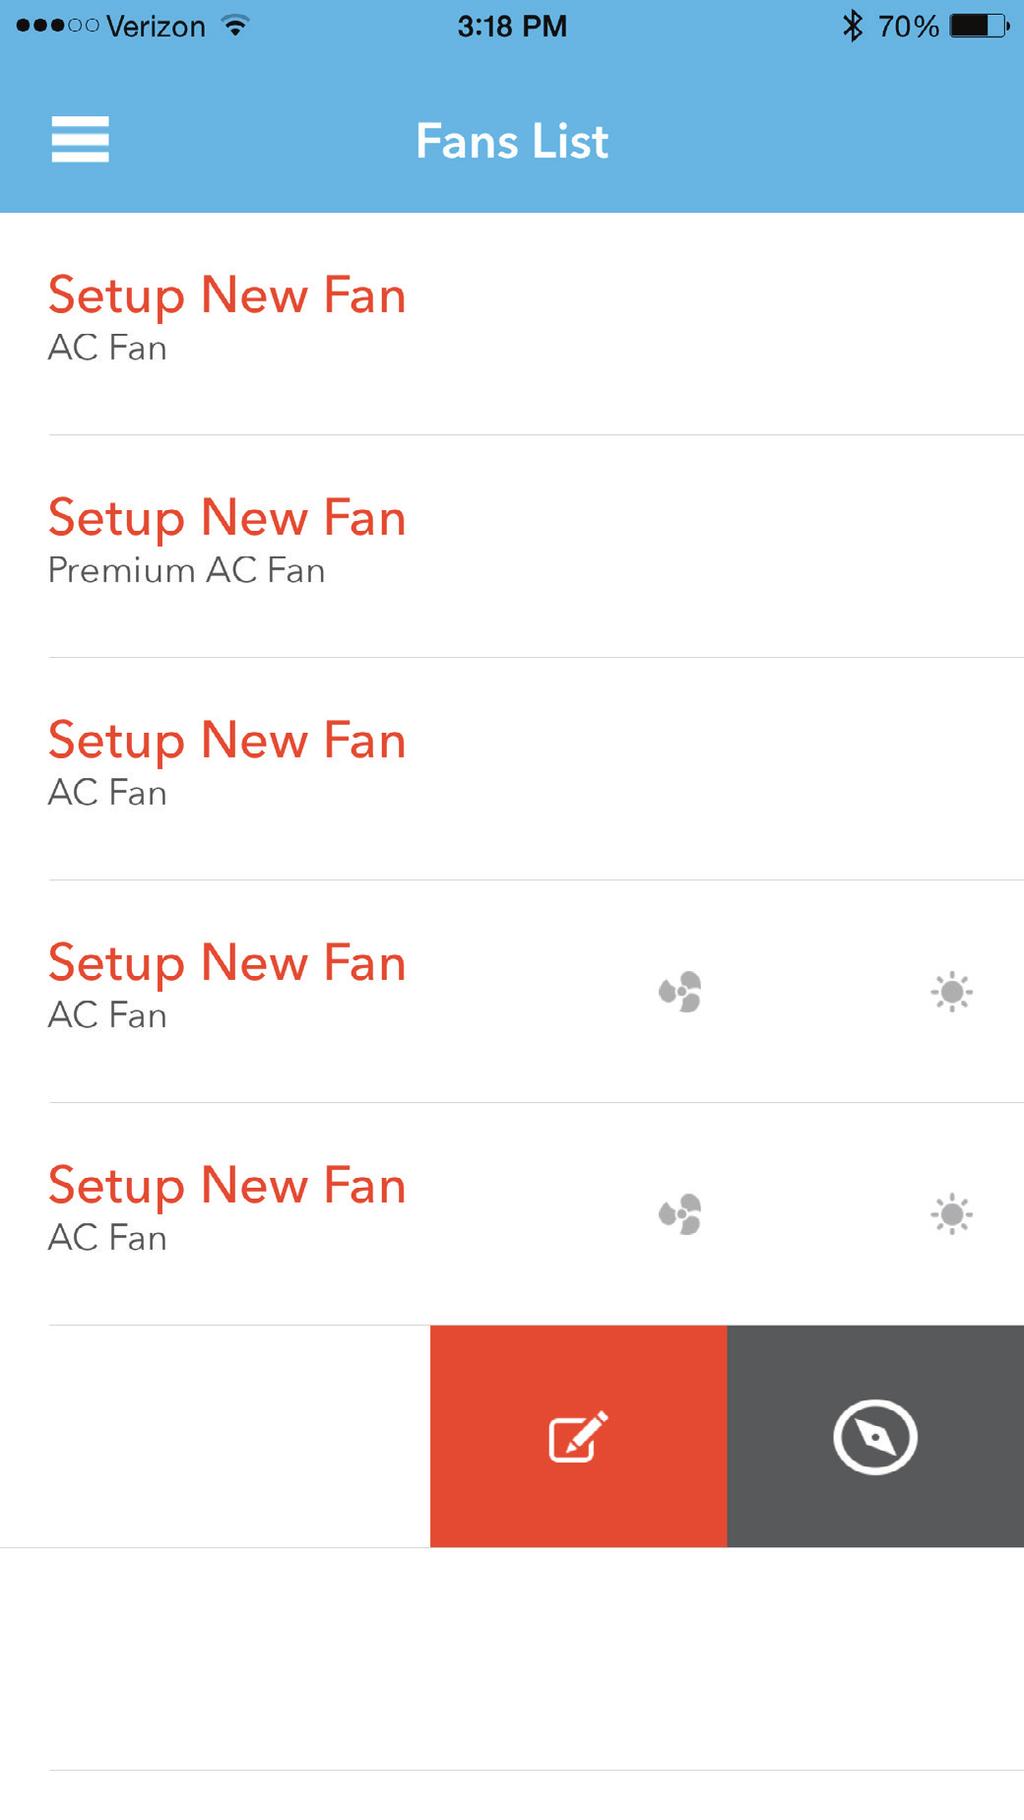 Take A Tour Of The New App And Its Features Fans List Fans List This area will display all available devices that are fansync enabled. Click Setup New Fan if you need to set up a new fan.